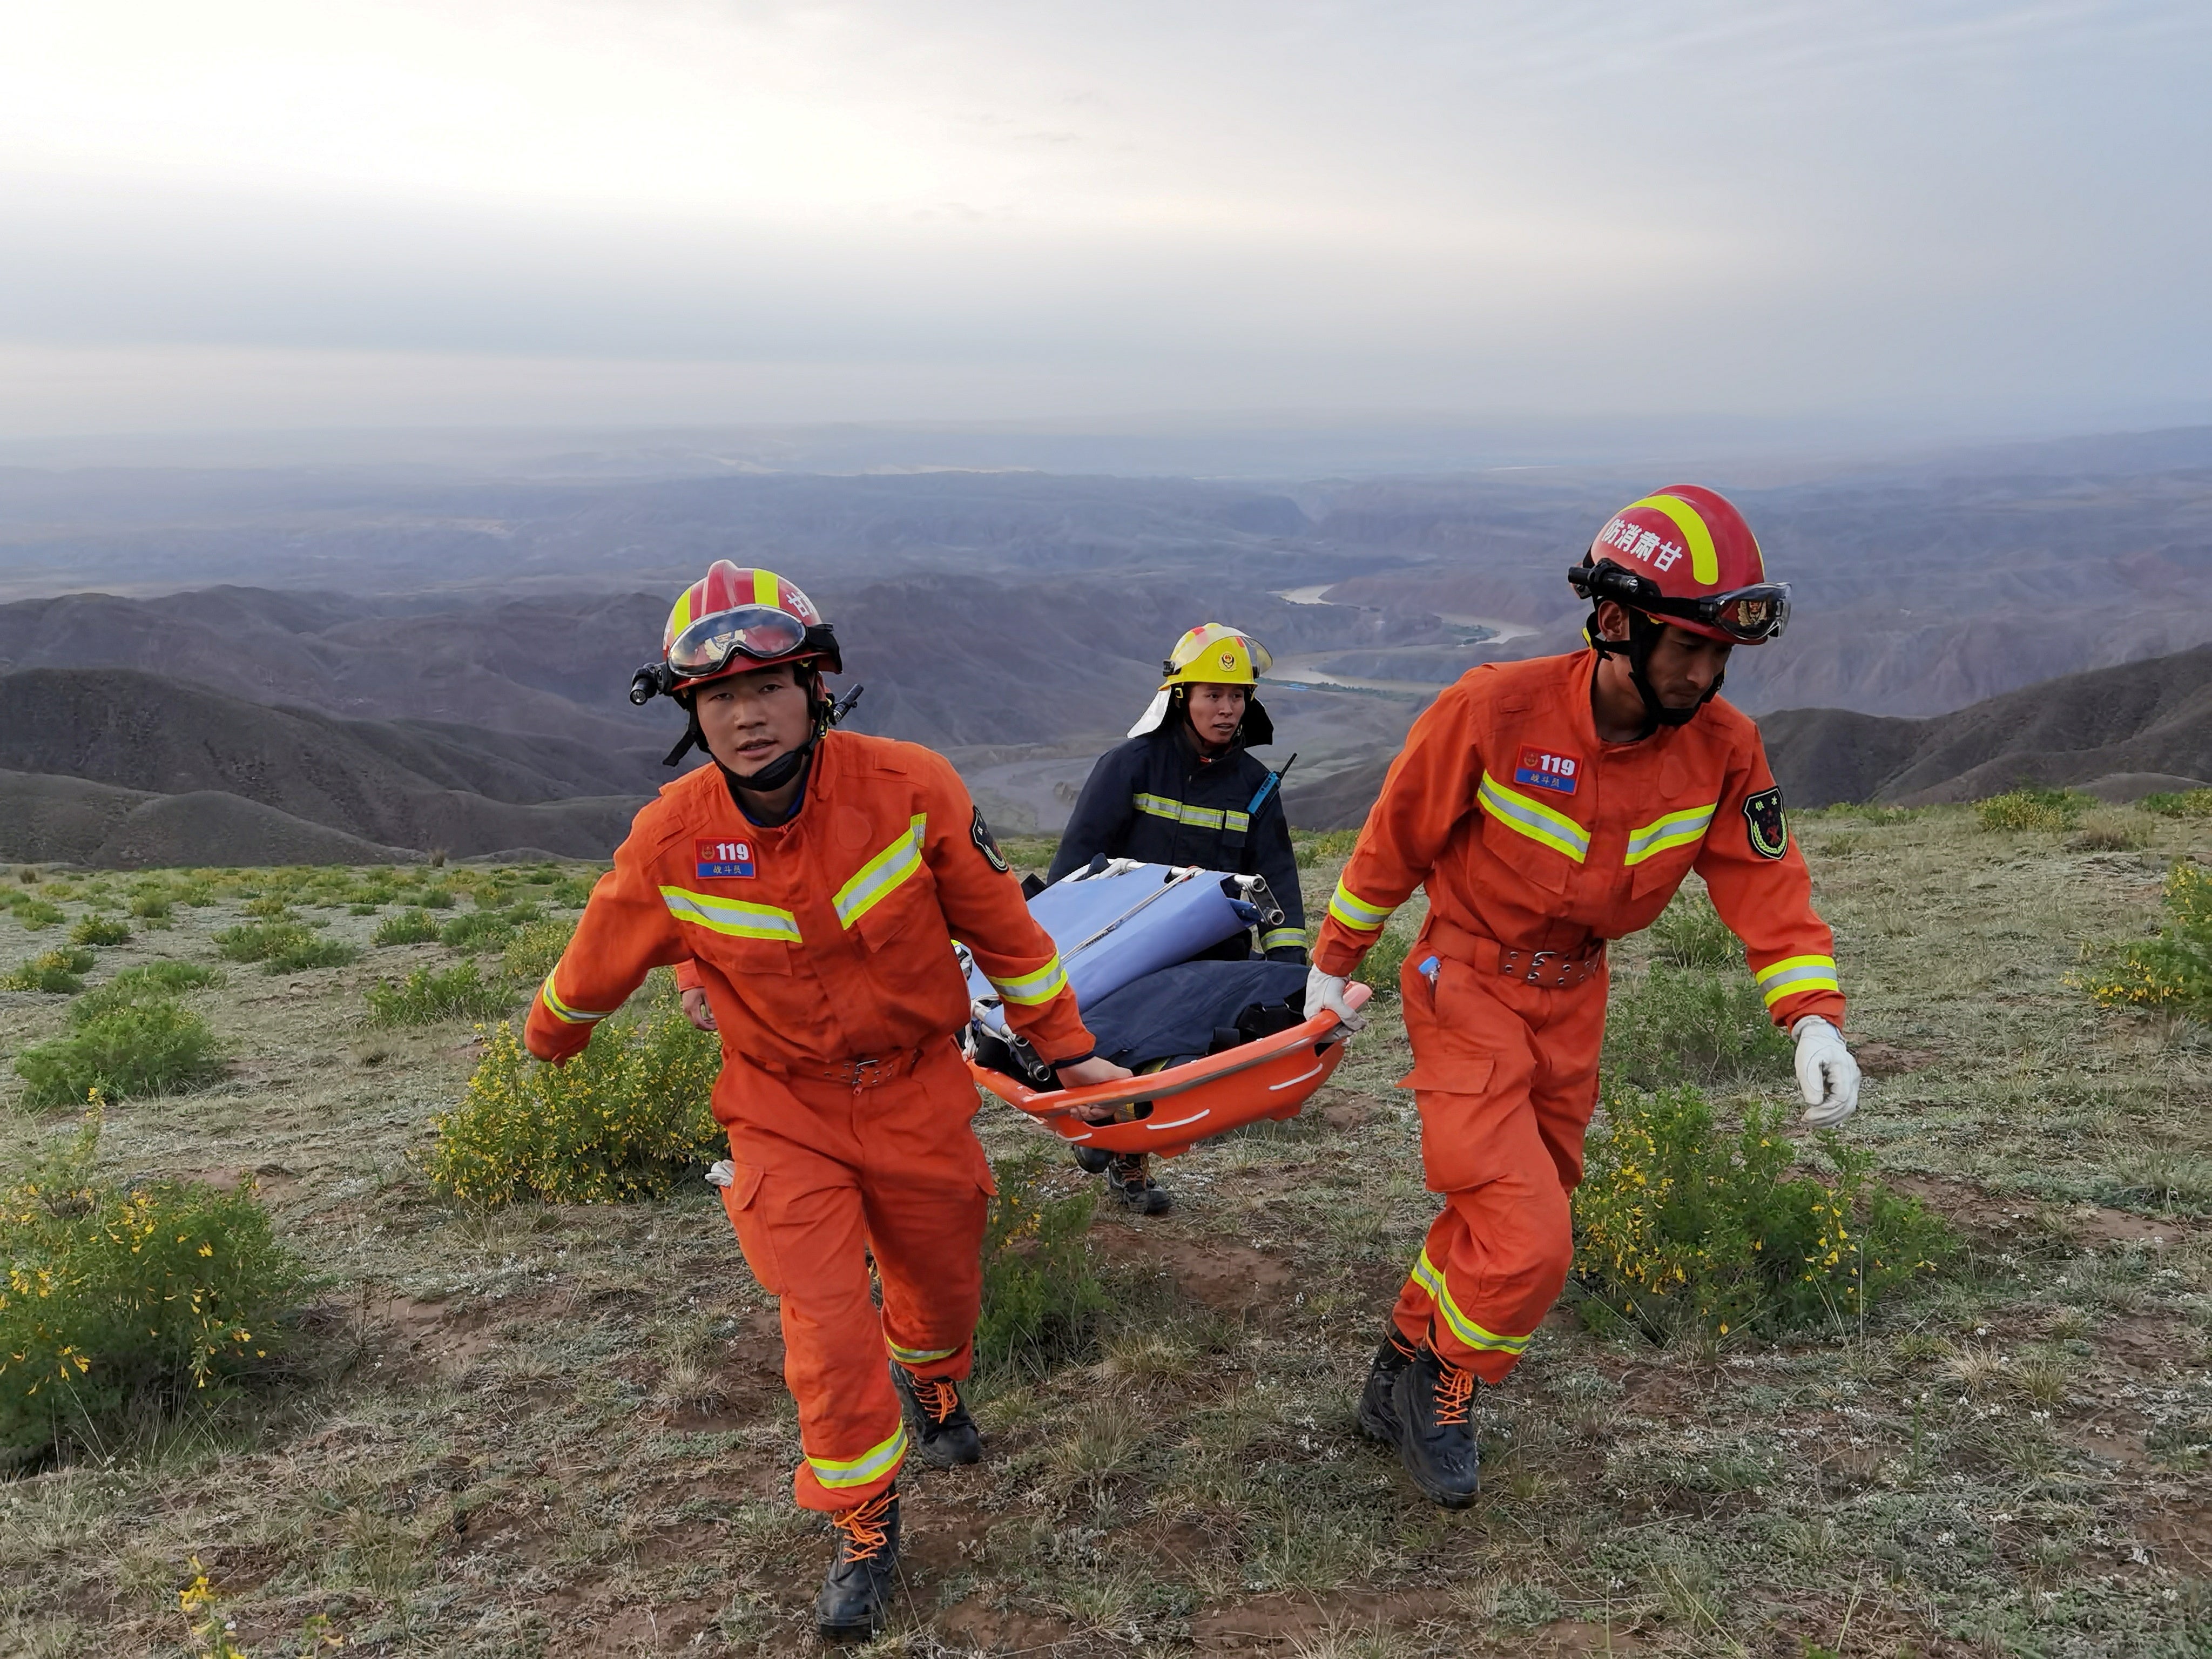 File image: Rescue workers carry a stretcher as they work at the site where extreme cold weather killed participants of an 100-km ultramarathon race in Baiyin, Gansu province, China